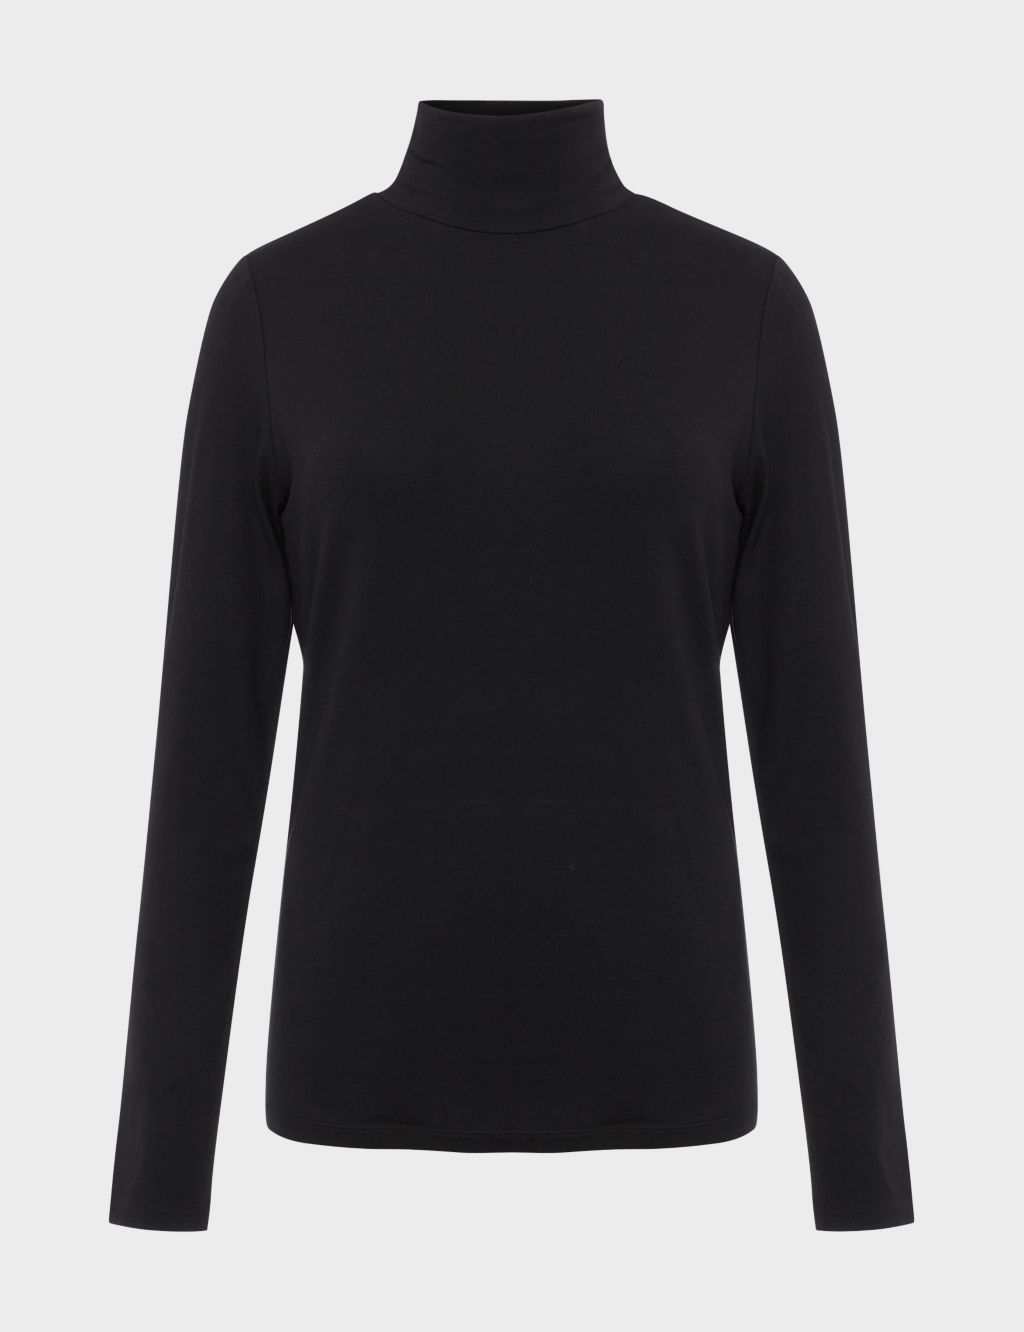 Page 2 - Women’s Knitted Tops | M&S